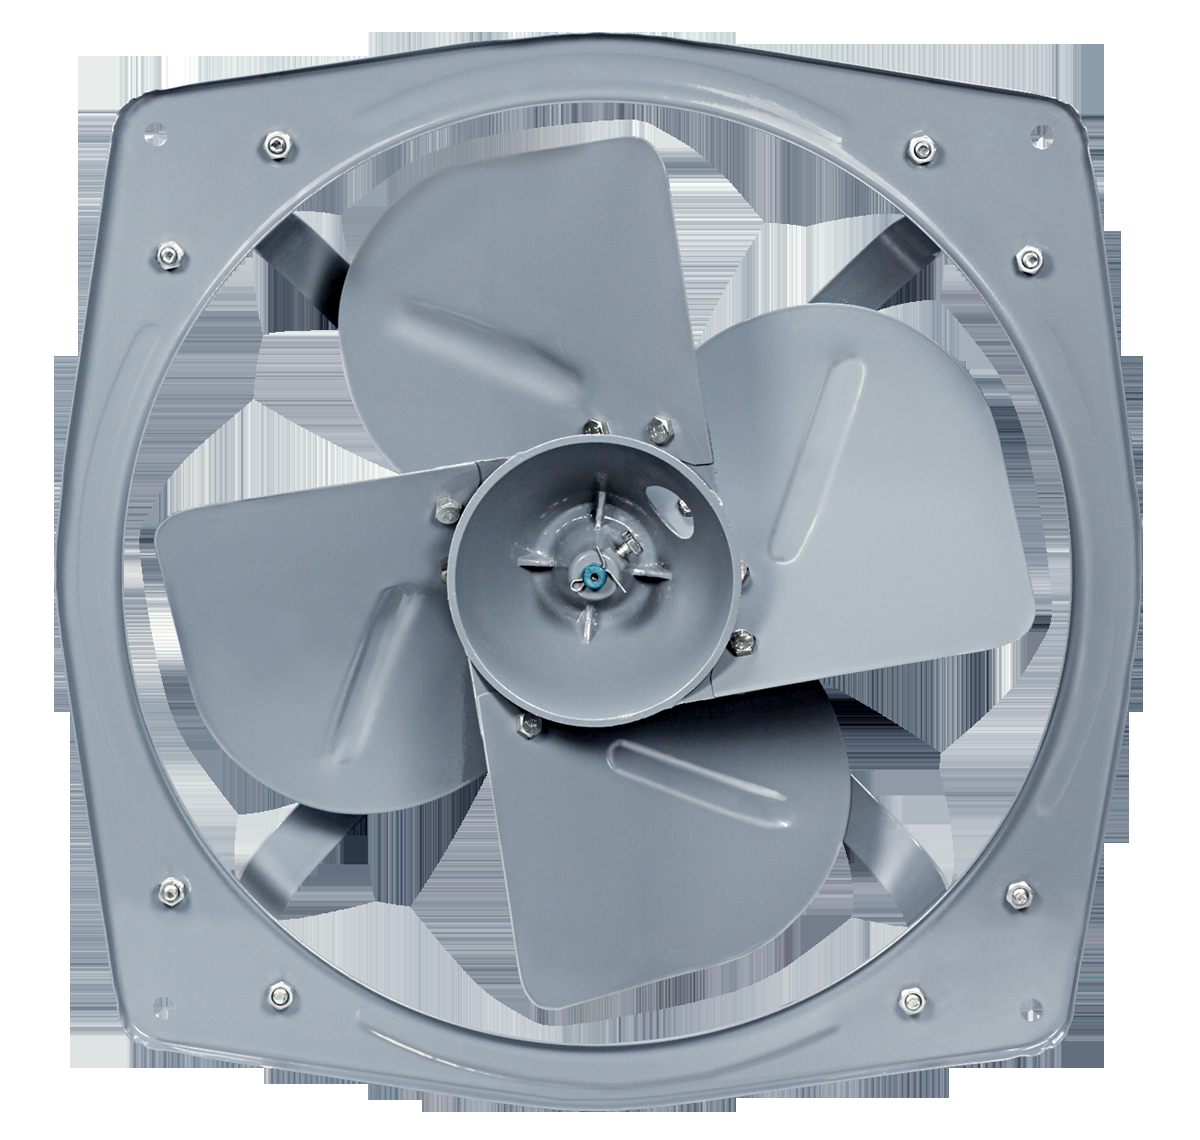 Havells Heavy Duty Exhaust Fan Turboforce 1400 Rpm Havells with sizing 1200 X 1140